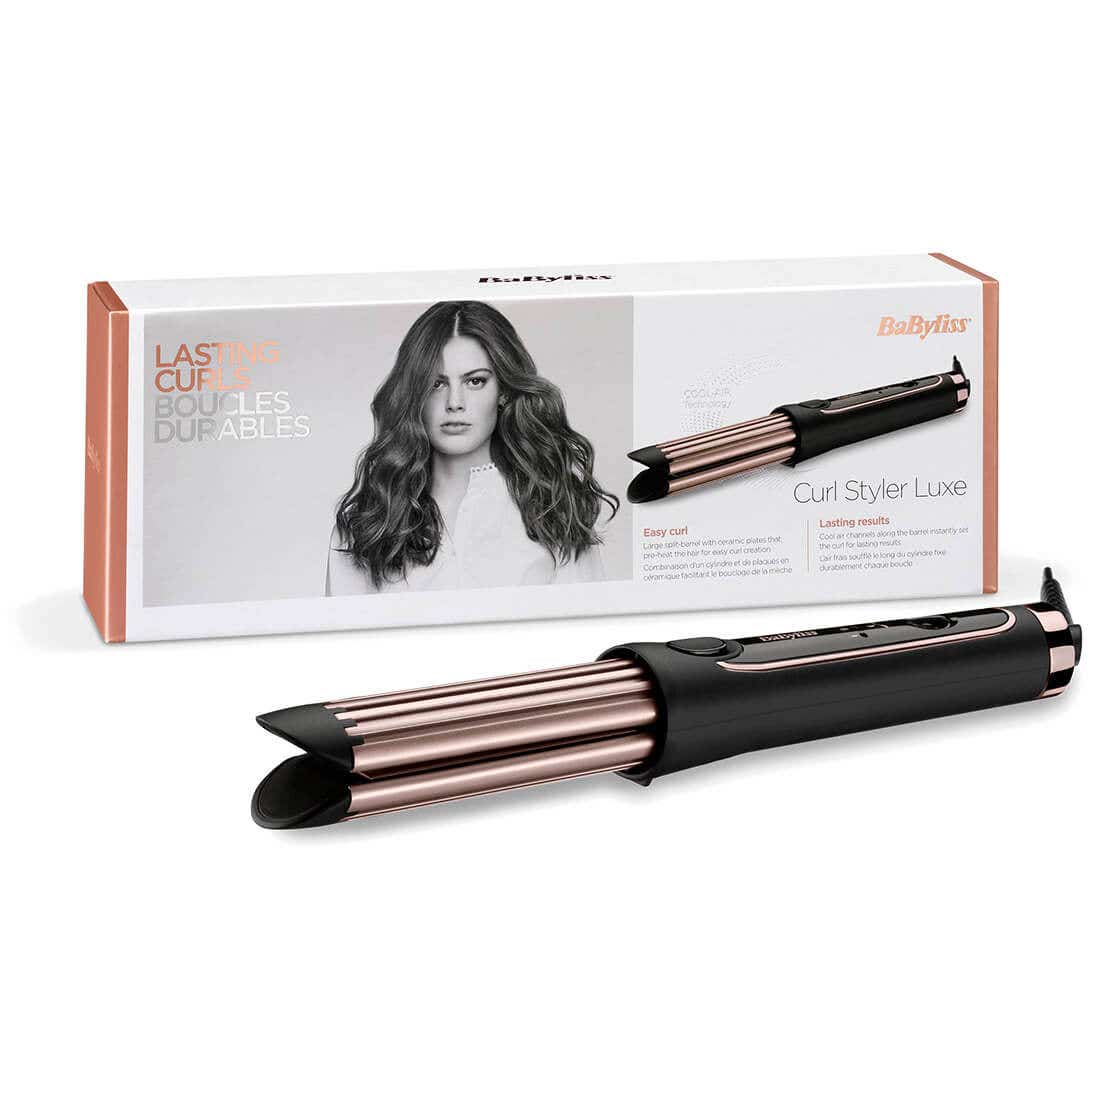 Babyliss Curl Styler Luxe Curling Iron